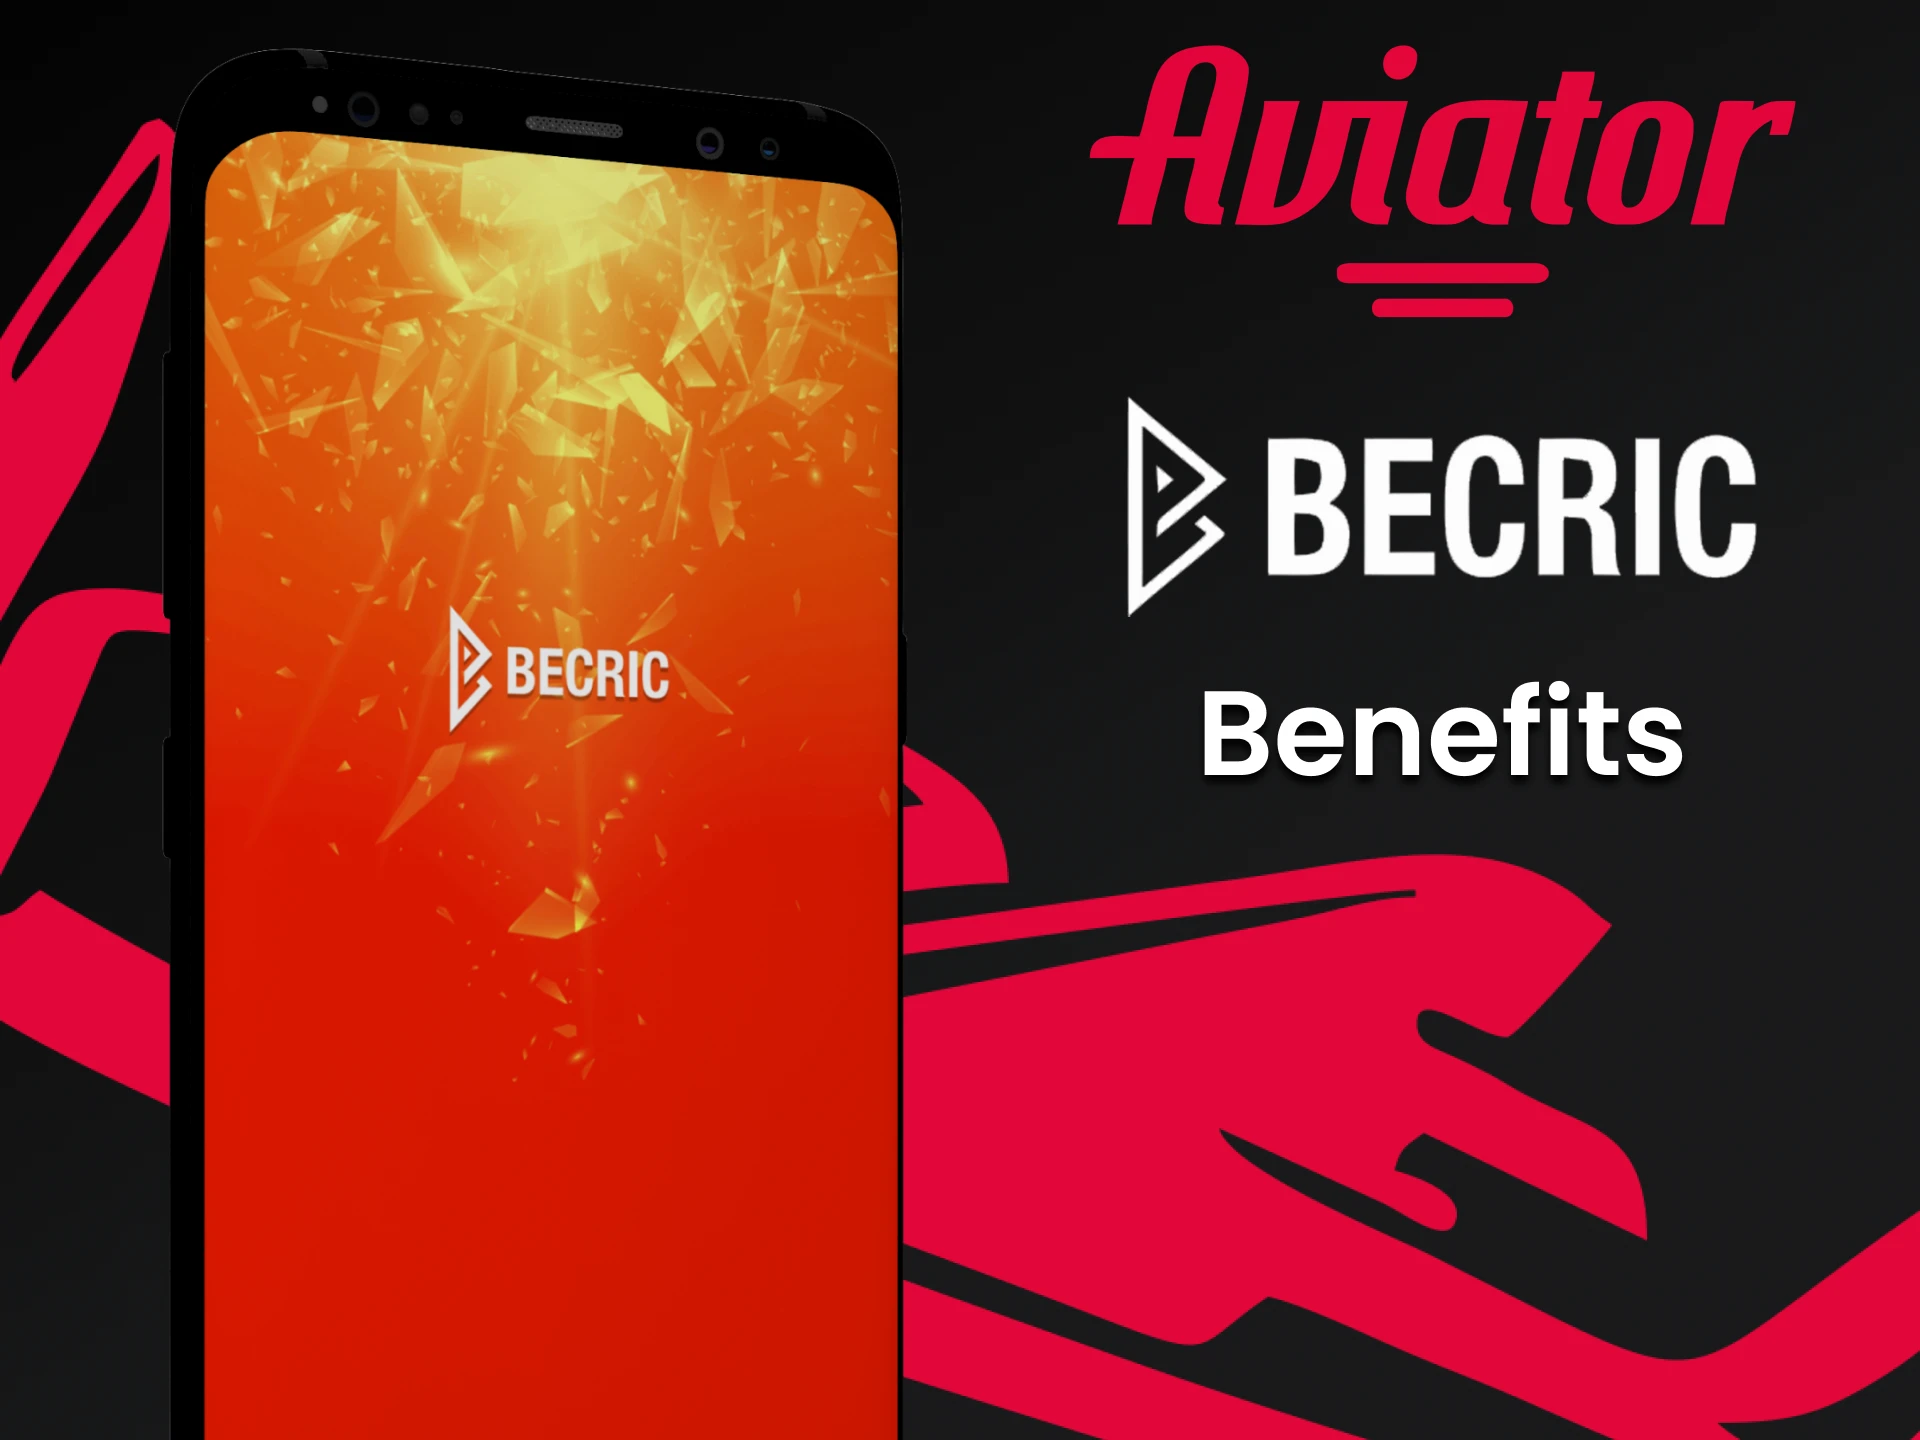 Becric is the best choice for playing Aviator.